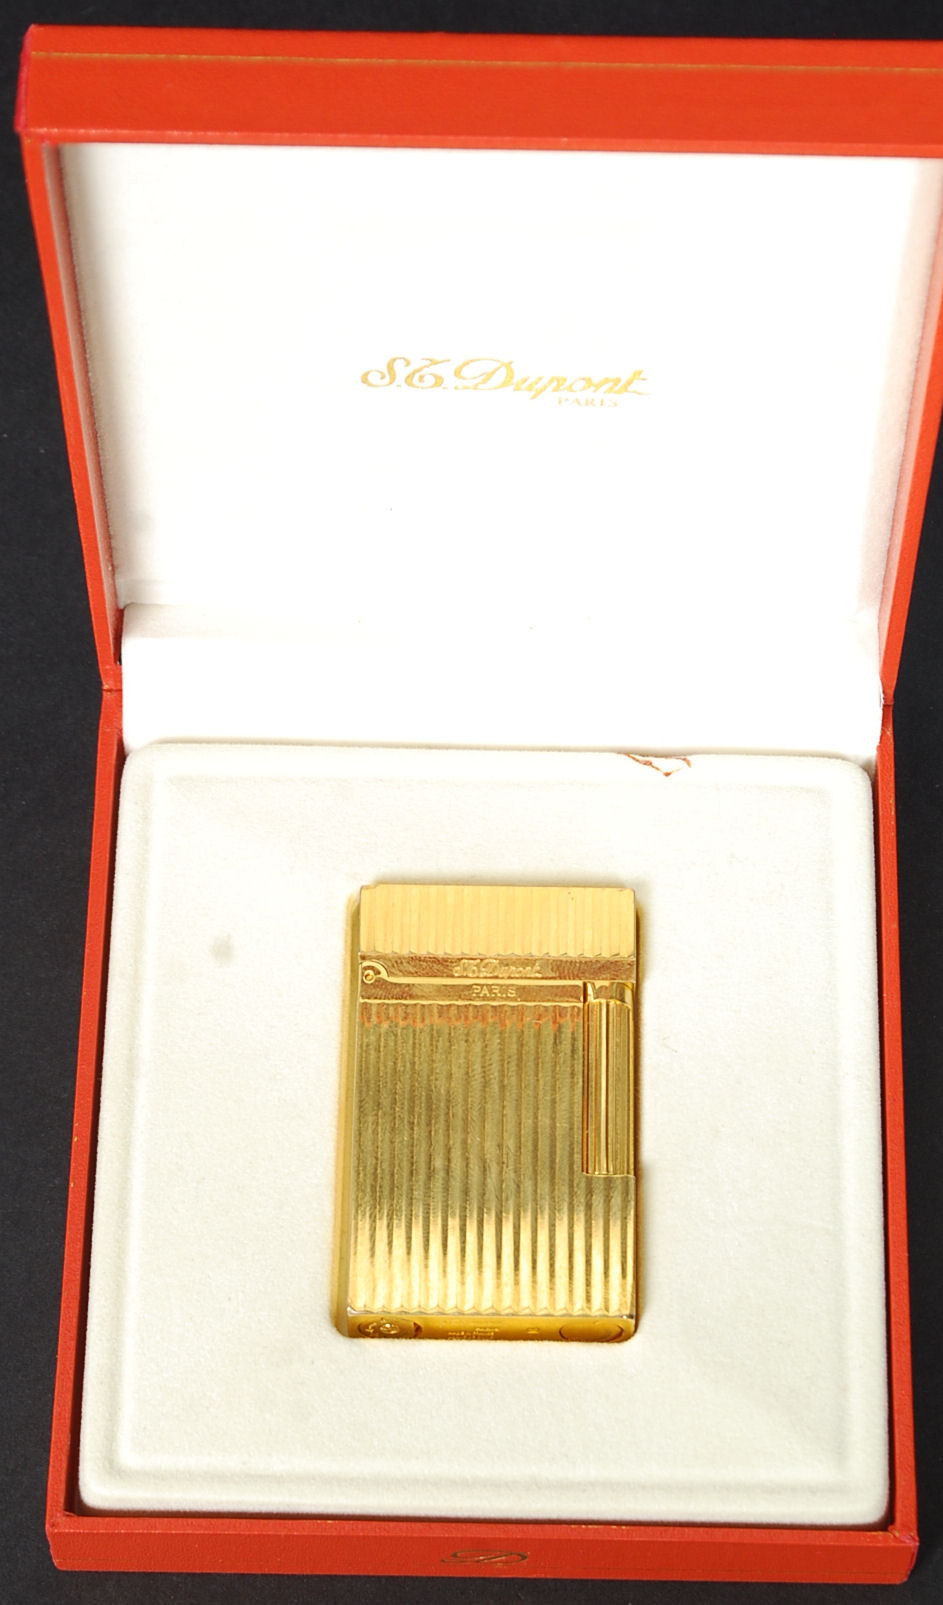 A stunning gold plated Dupont Stylo Plume L2 045290 Laque De Chine cigarette lighter complete in - Image 4 of 4